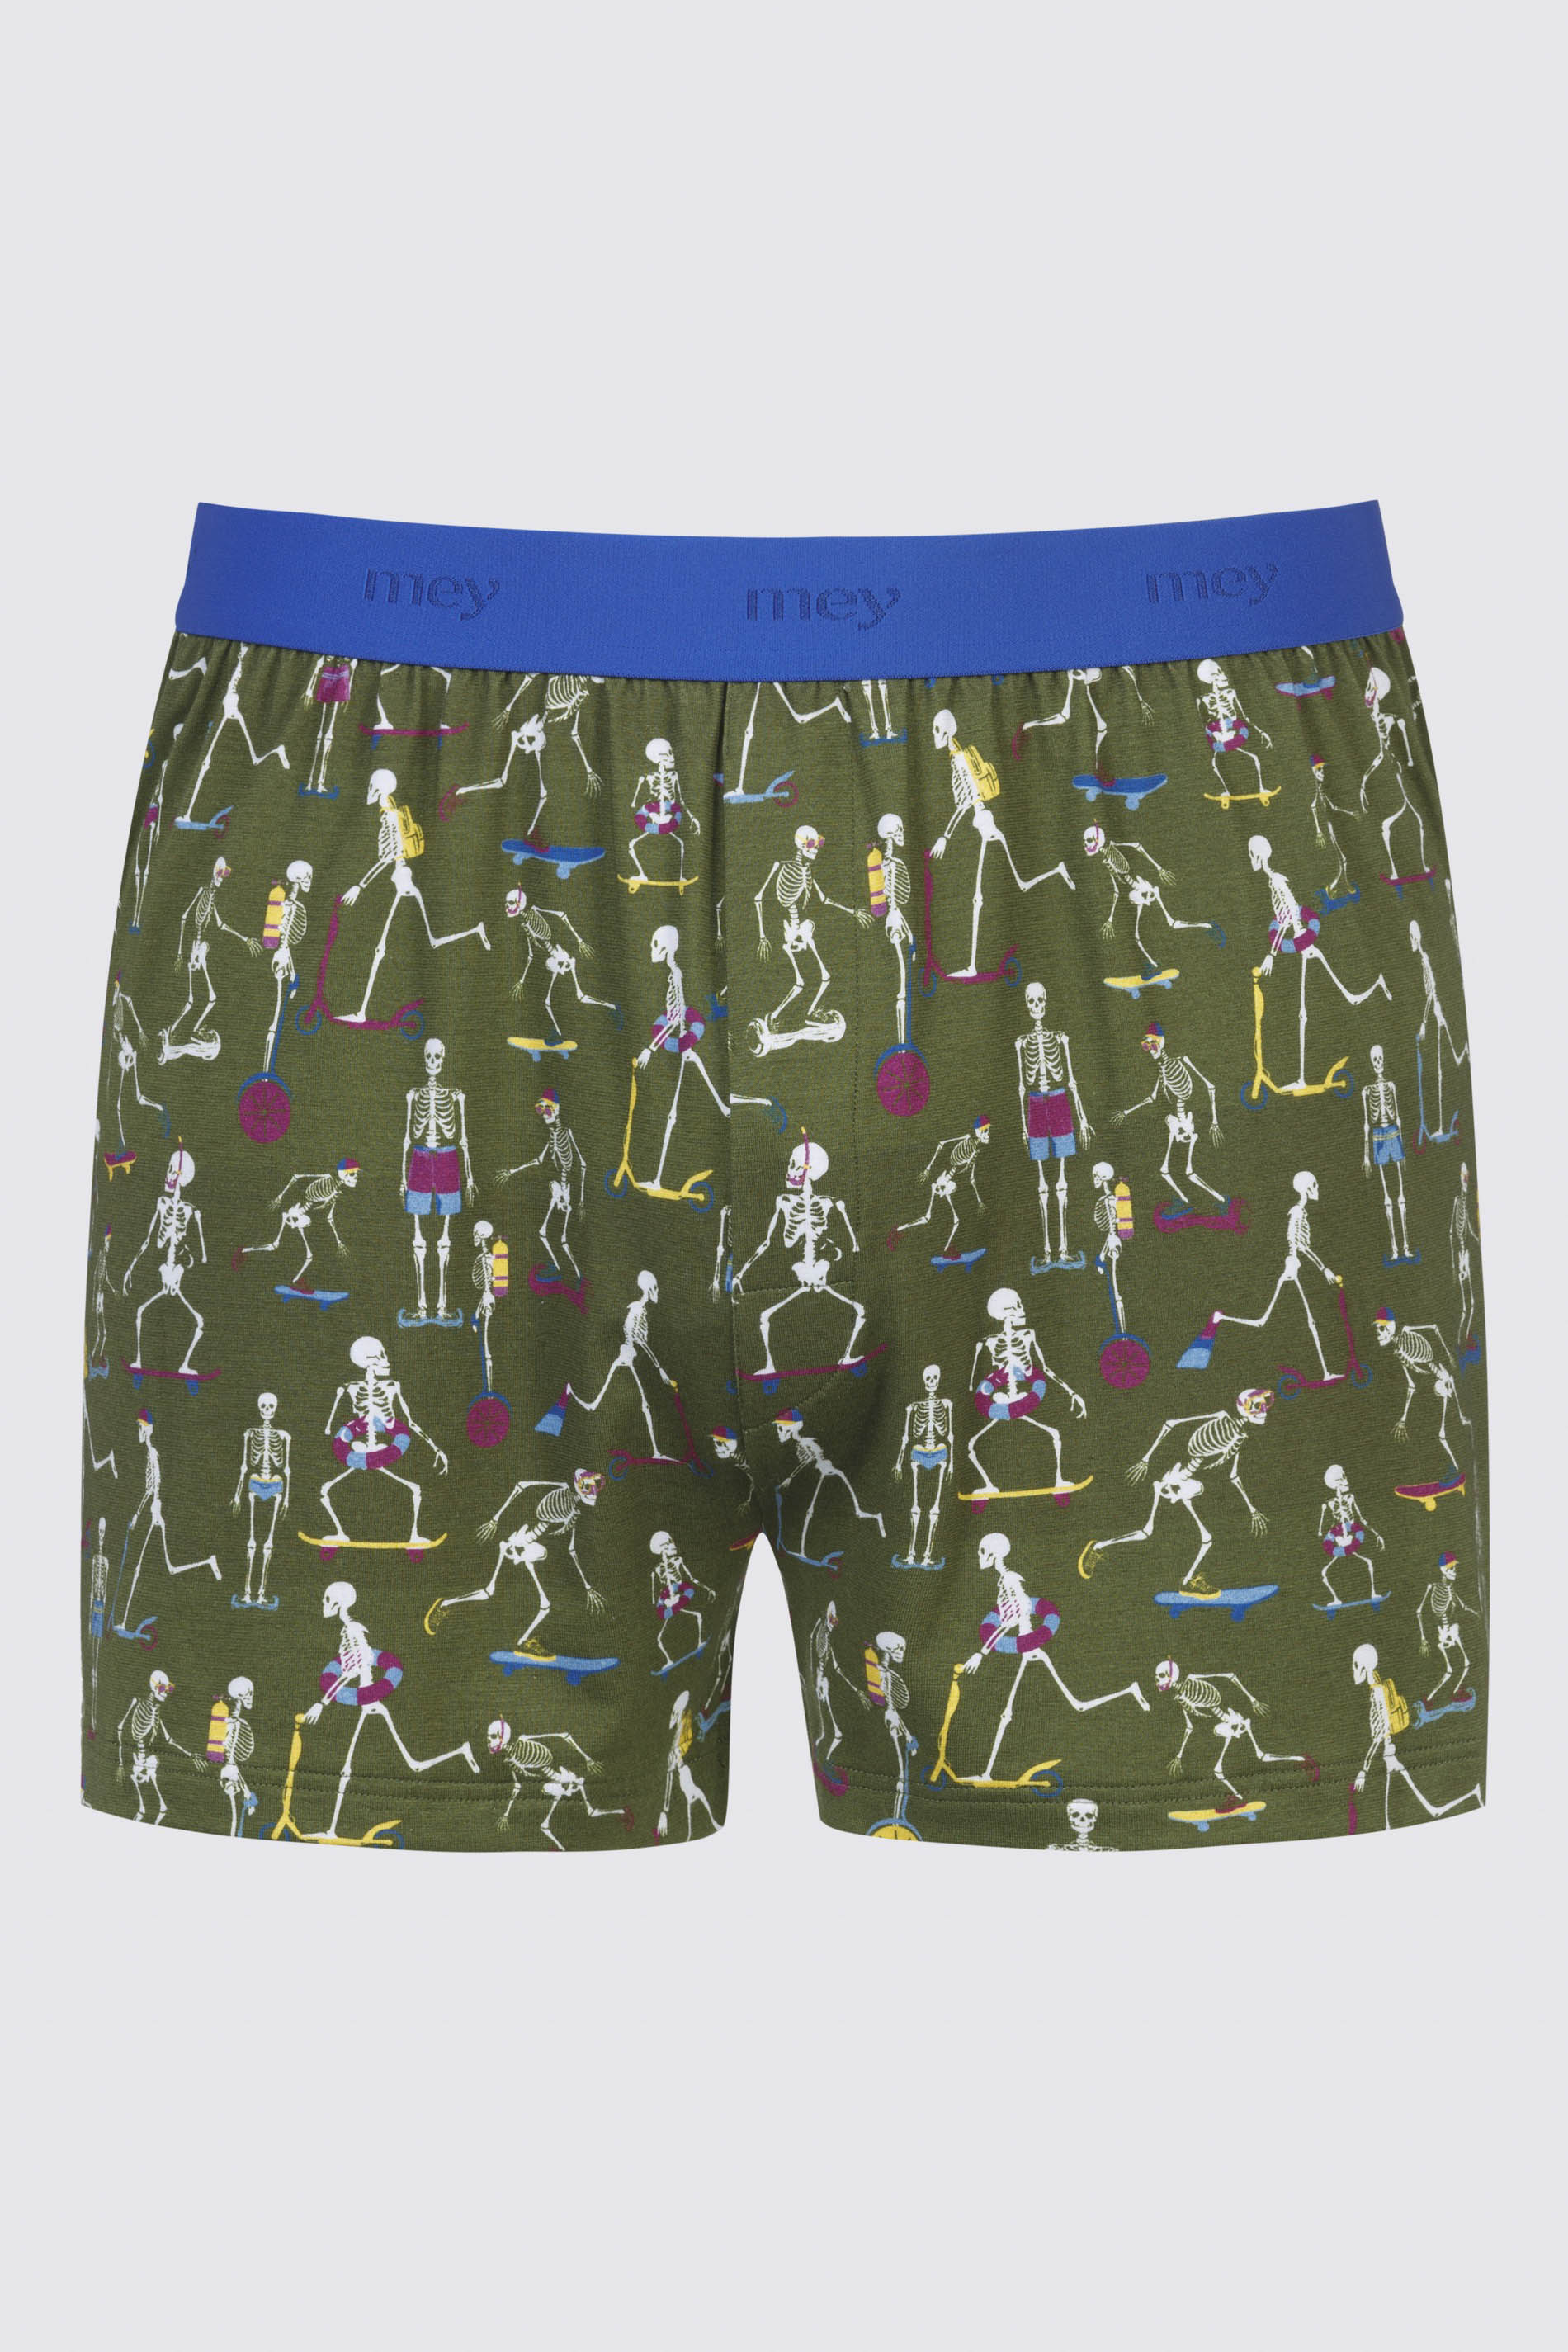 Boxershorts Serie RE:THINK Skeleton Uitknippen | mey®